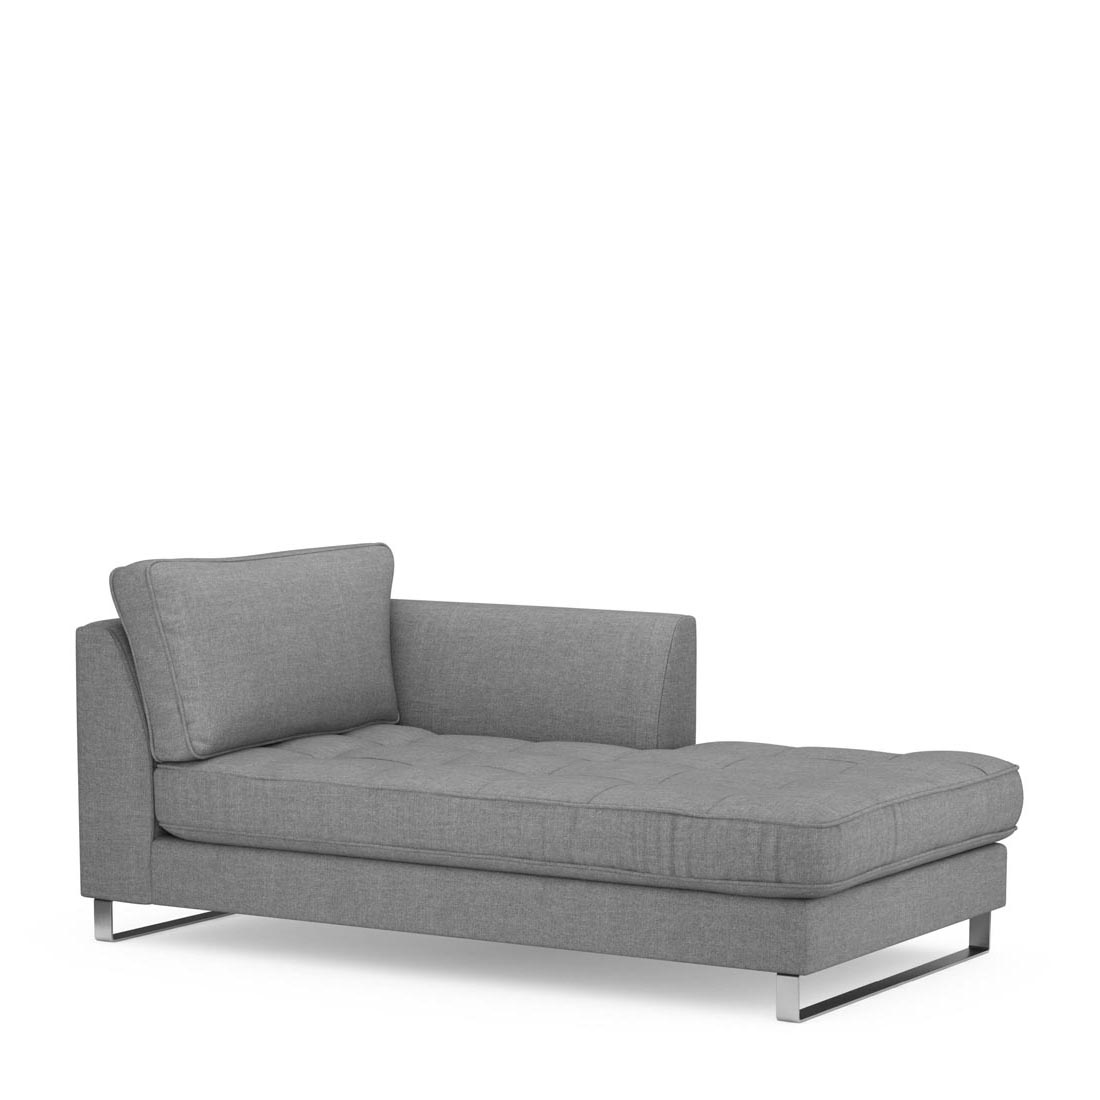 West Houston Chaiselongue Right, washed cotton, grey